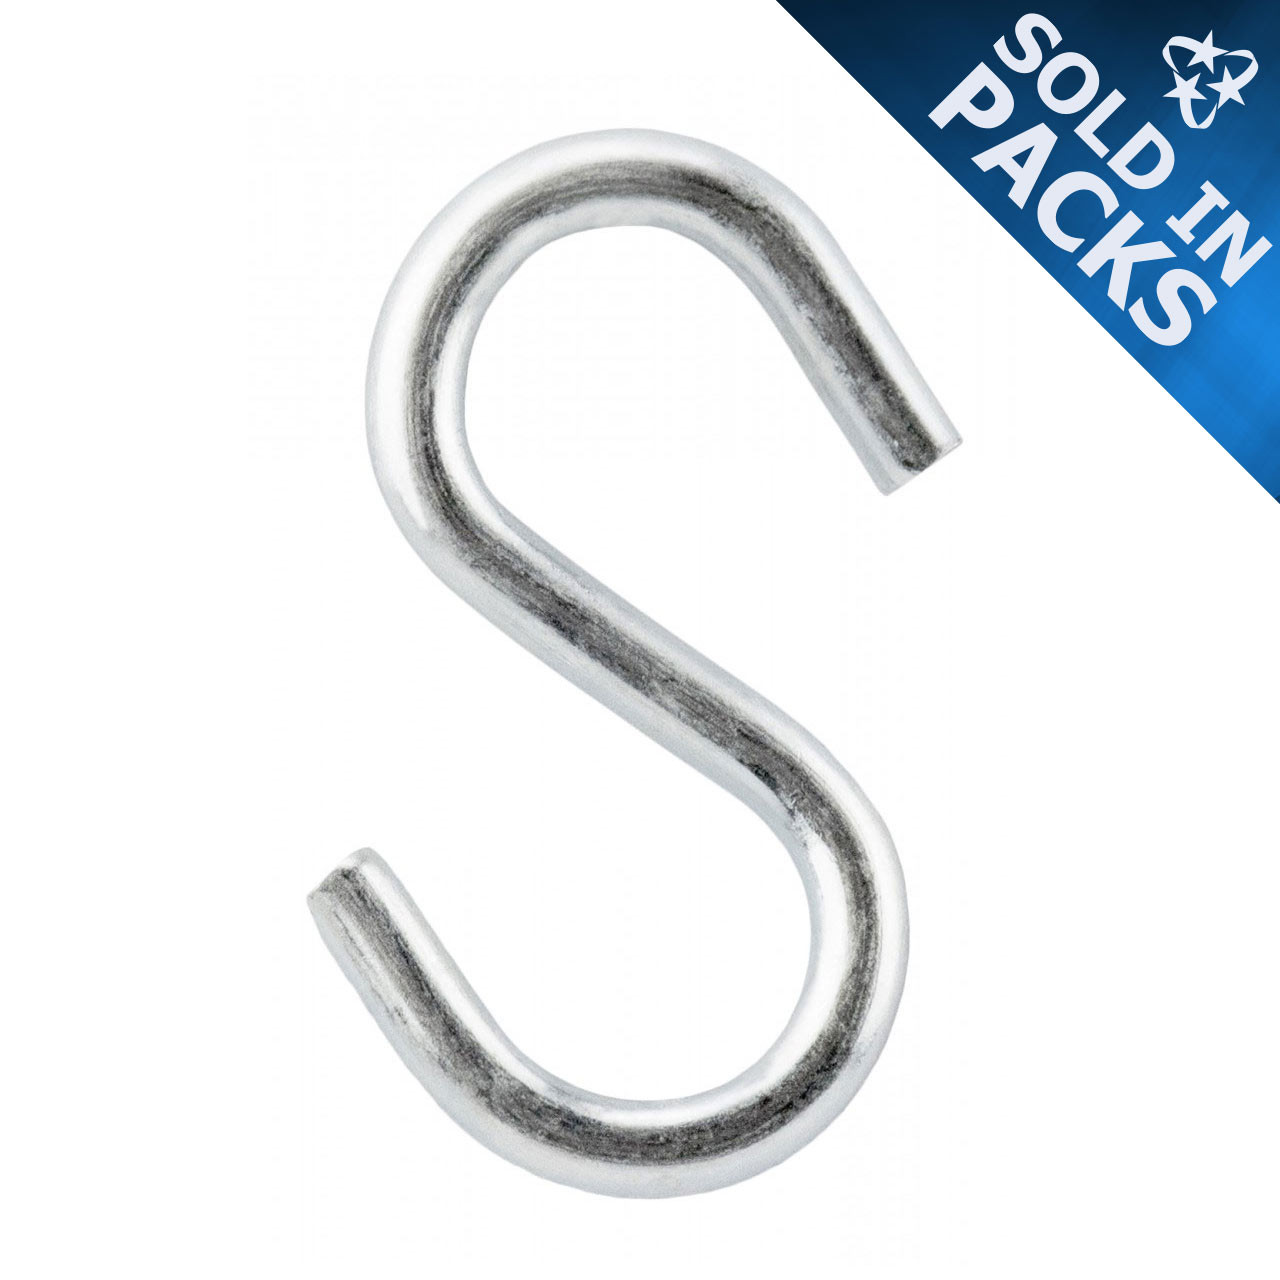  Axe Sickle 12 Pcs 2.3 Inch S Hook 304 Stainless Steel Hanging  Hooks for Hanging Products or Items, Chain Hardware : Industrial &  Scientific